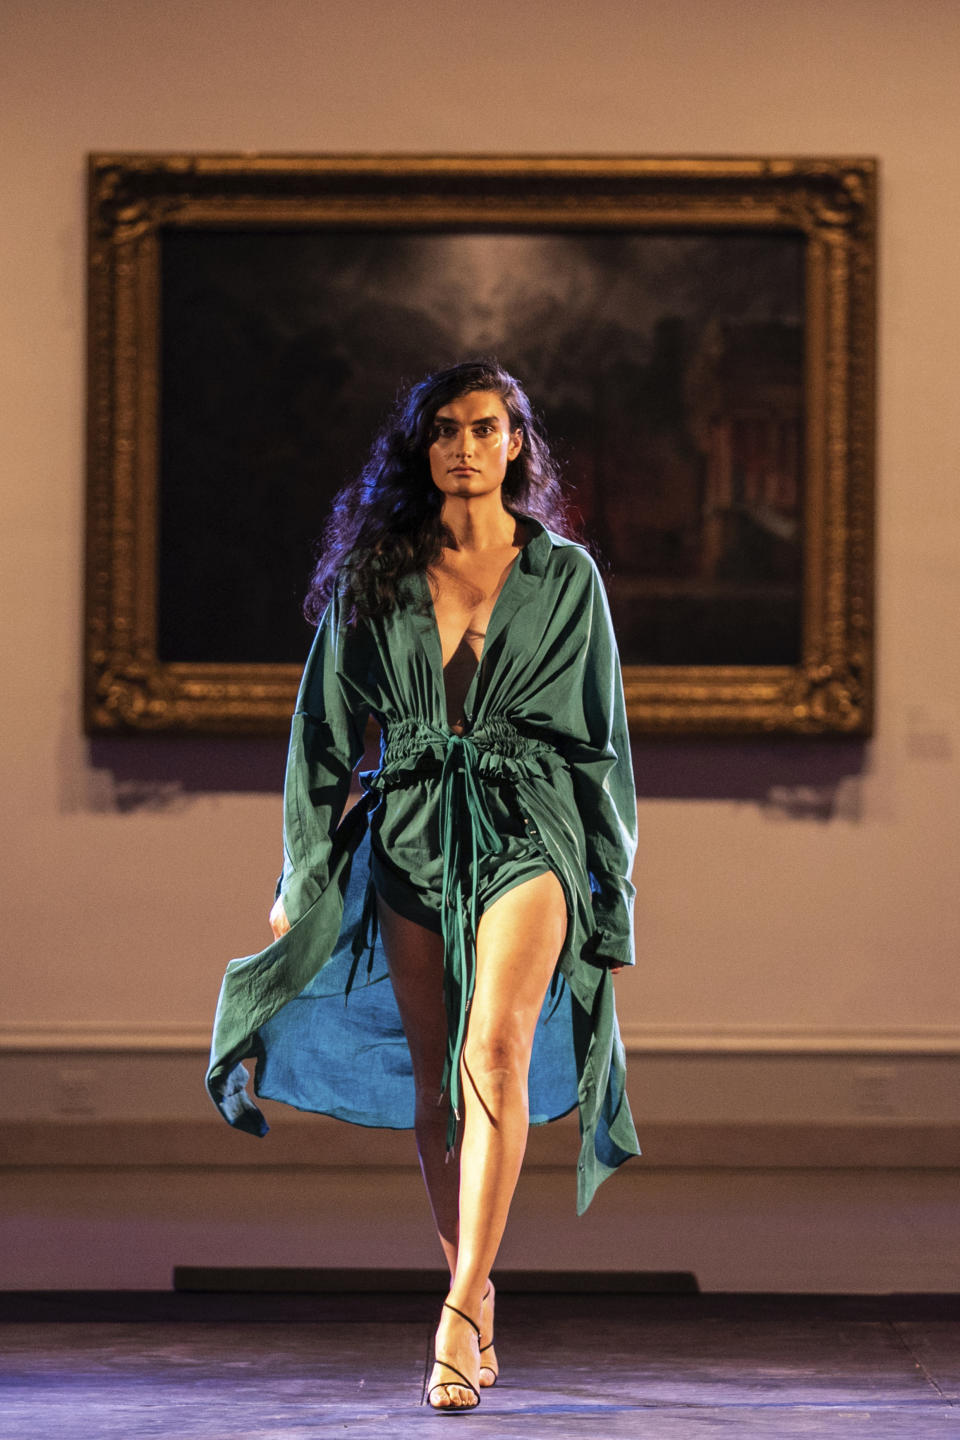 The HALZ collection is modeled during the dapperQ fashion show at the Brooklyn Museum on Thursday Sept. 5, 2019, in New York. (AP Photo/Jeenah Moon)